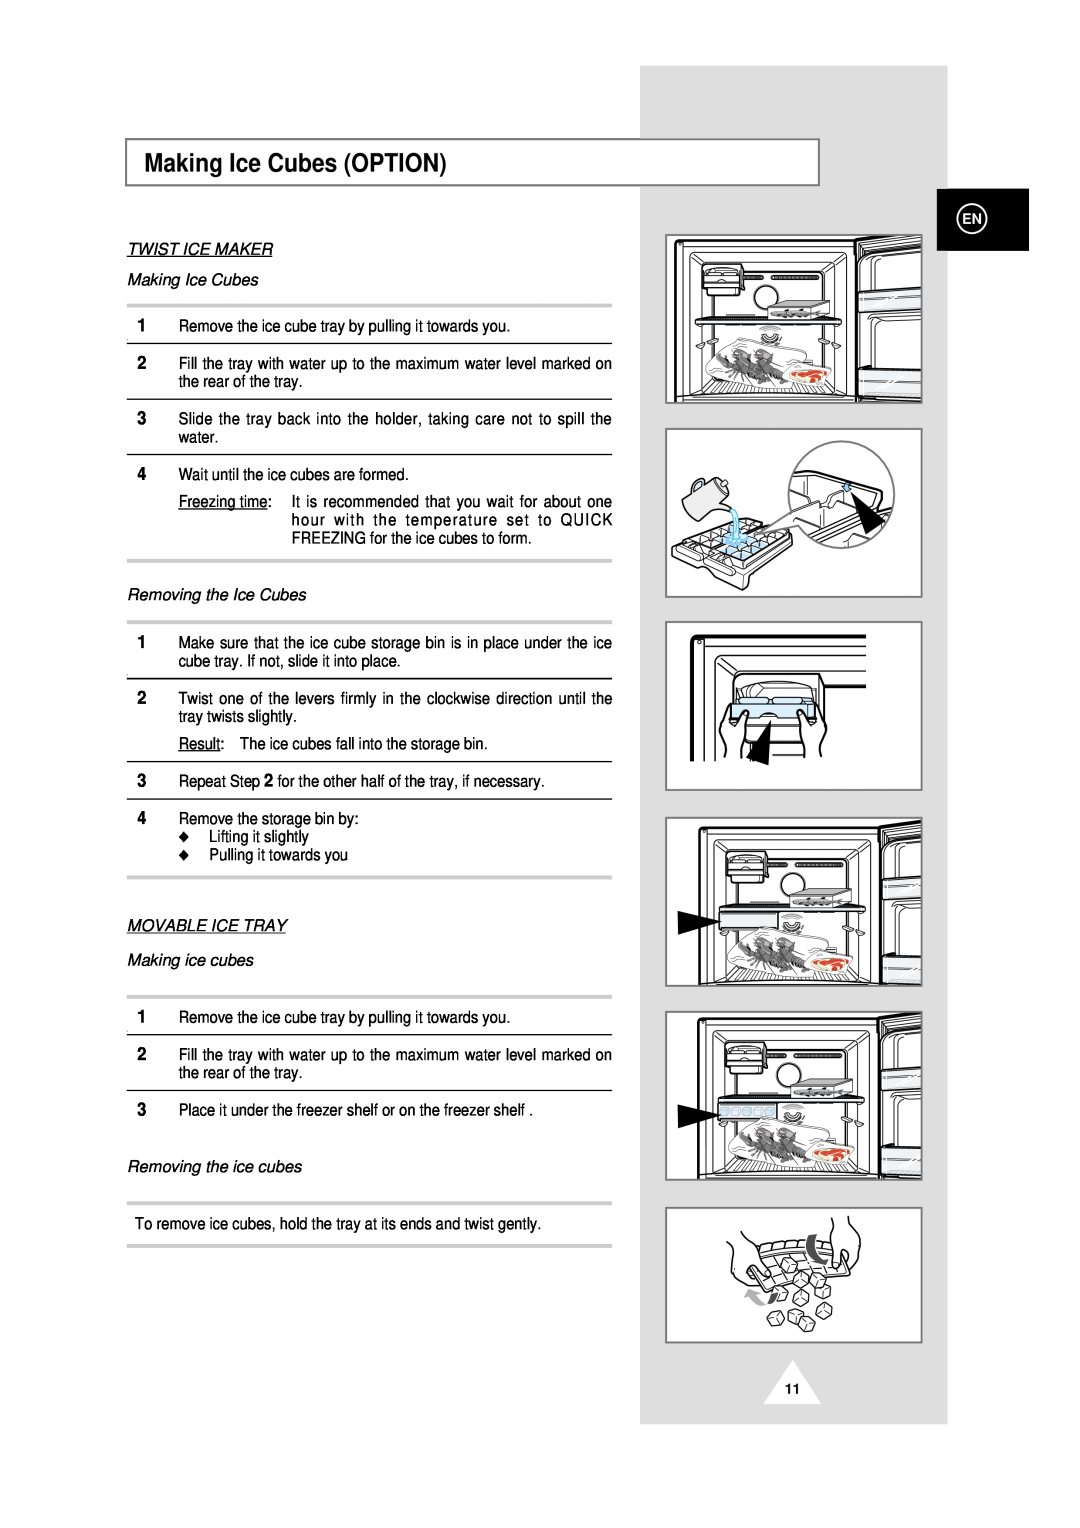 Samsung DA99-00478C instruction manual Making Ice Cubes OPTION, TWIST ICE MAKER Making Ice Cubes, Removing the Ice Cubes 